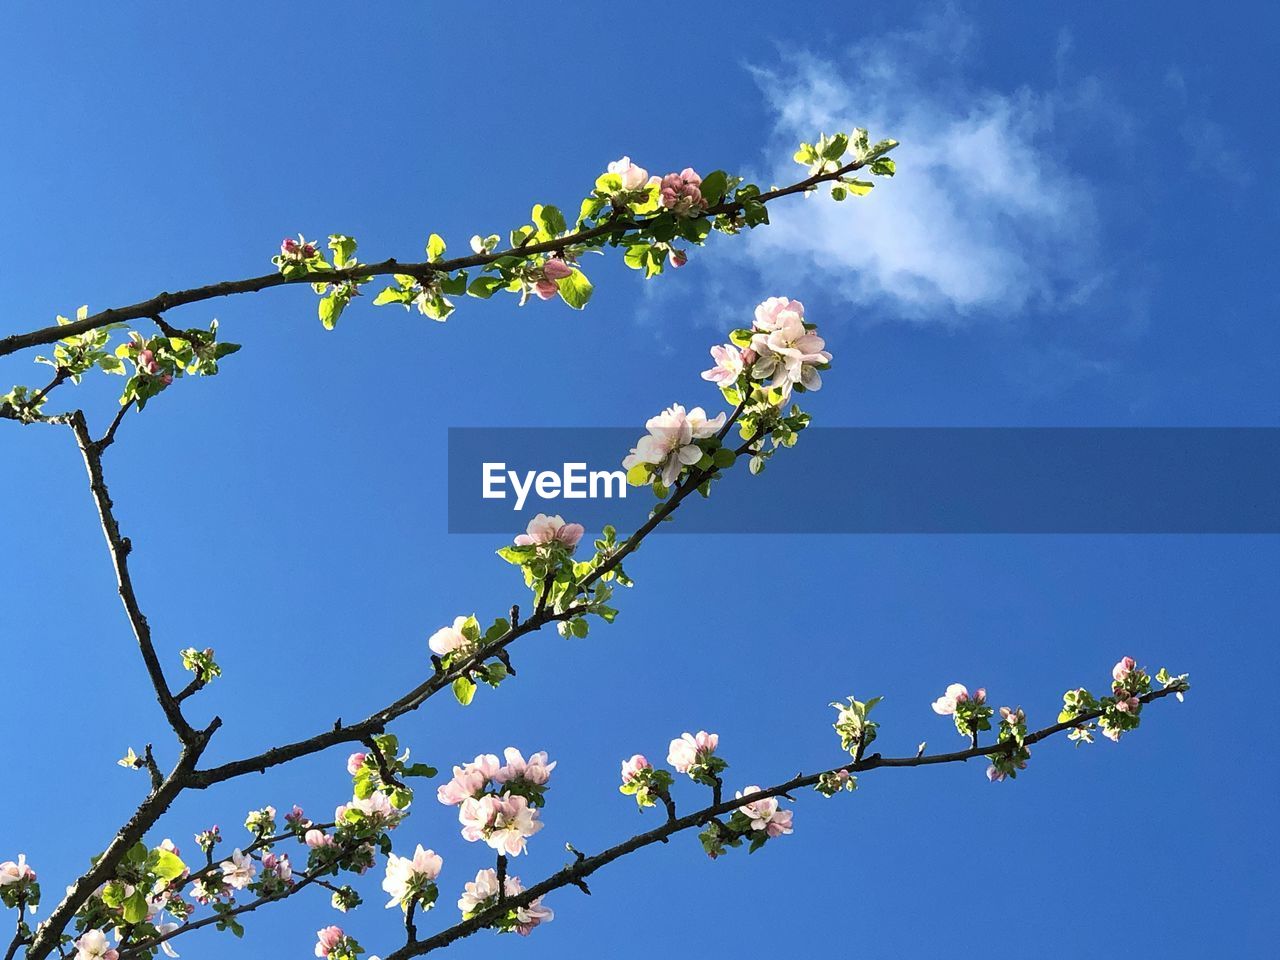 plant, flower, tree, branch, nature, sky, flowering plant, blossom, springtime, beauty in nature, growth, freshness, fragility, blue, no people, spring, low angle view, clear sky, outdoors, day, twig, fruit tree, food and drink, botany, cherry blossom, fruit, sunny, sunlight, food, plant part, leaf